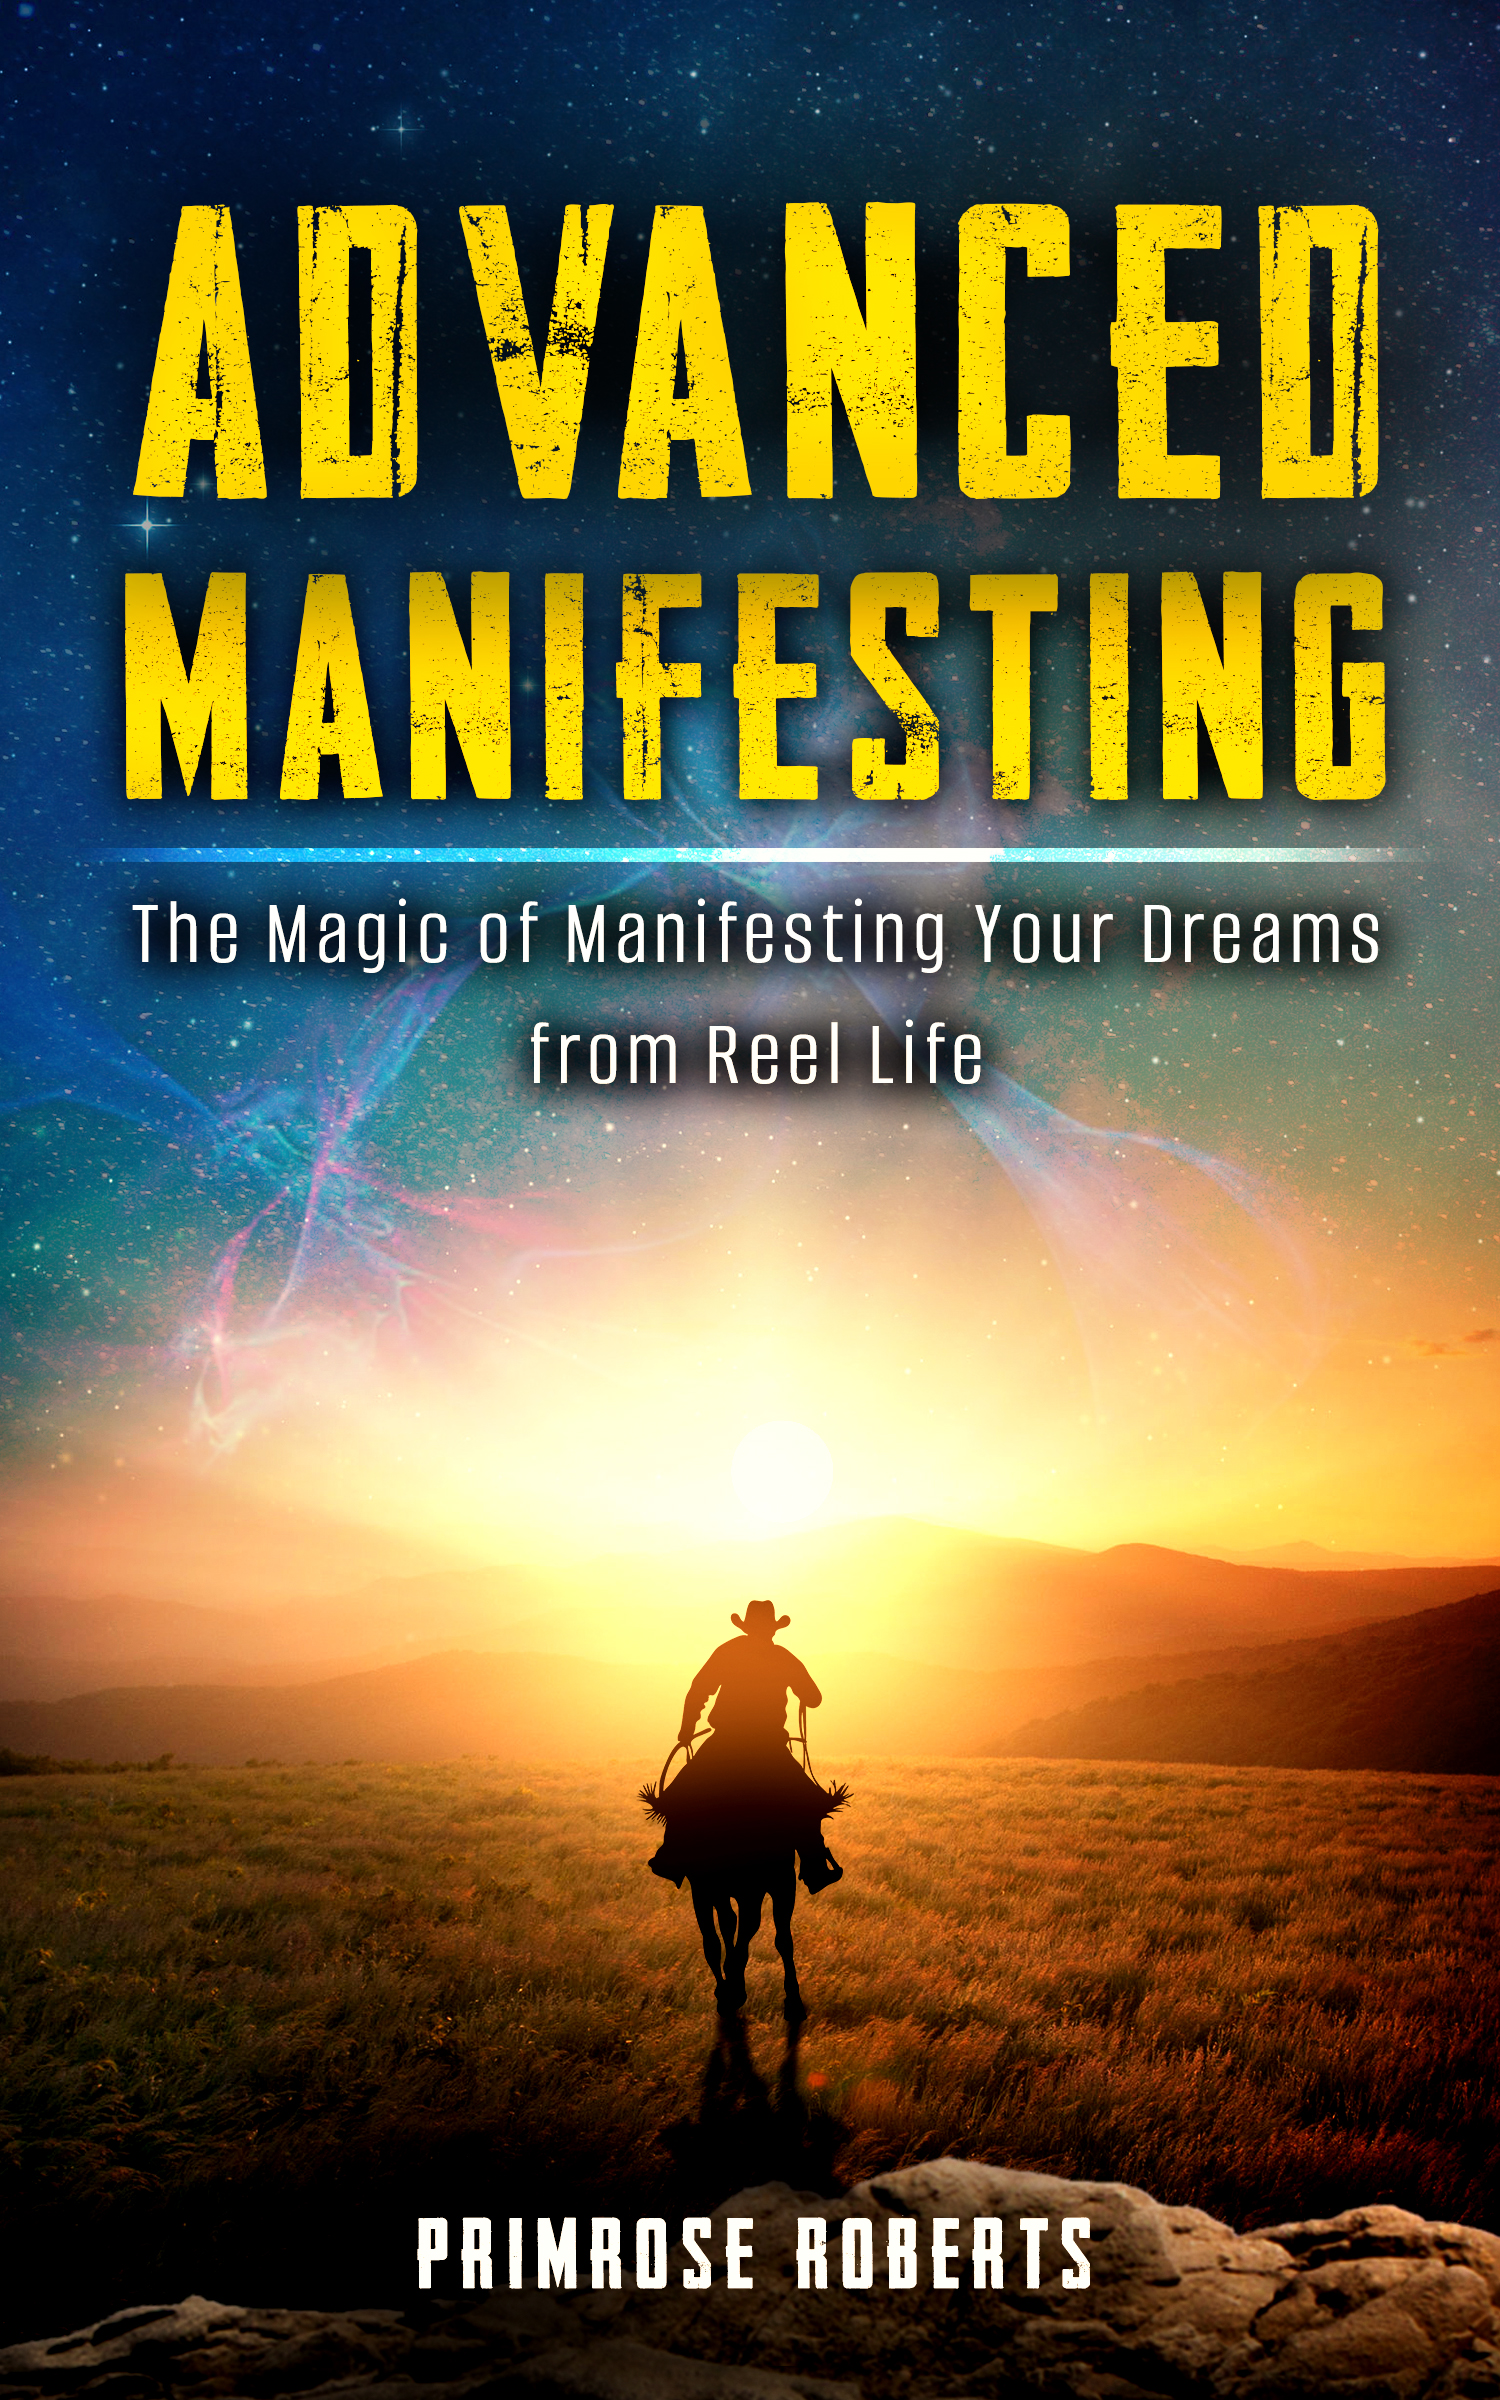 Primrose Roberts Deciphers The Law of Attraction In Advanced Manifesting: The Magic of Manifesting Your Dreams from Reel Life